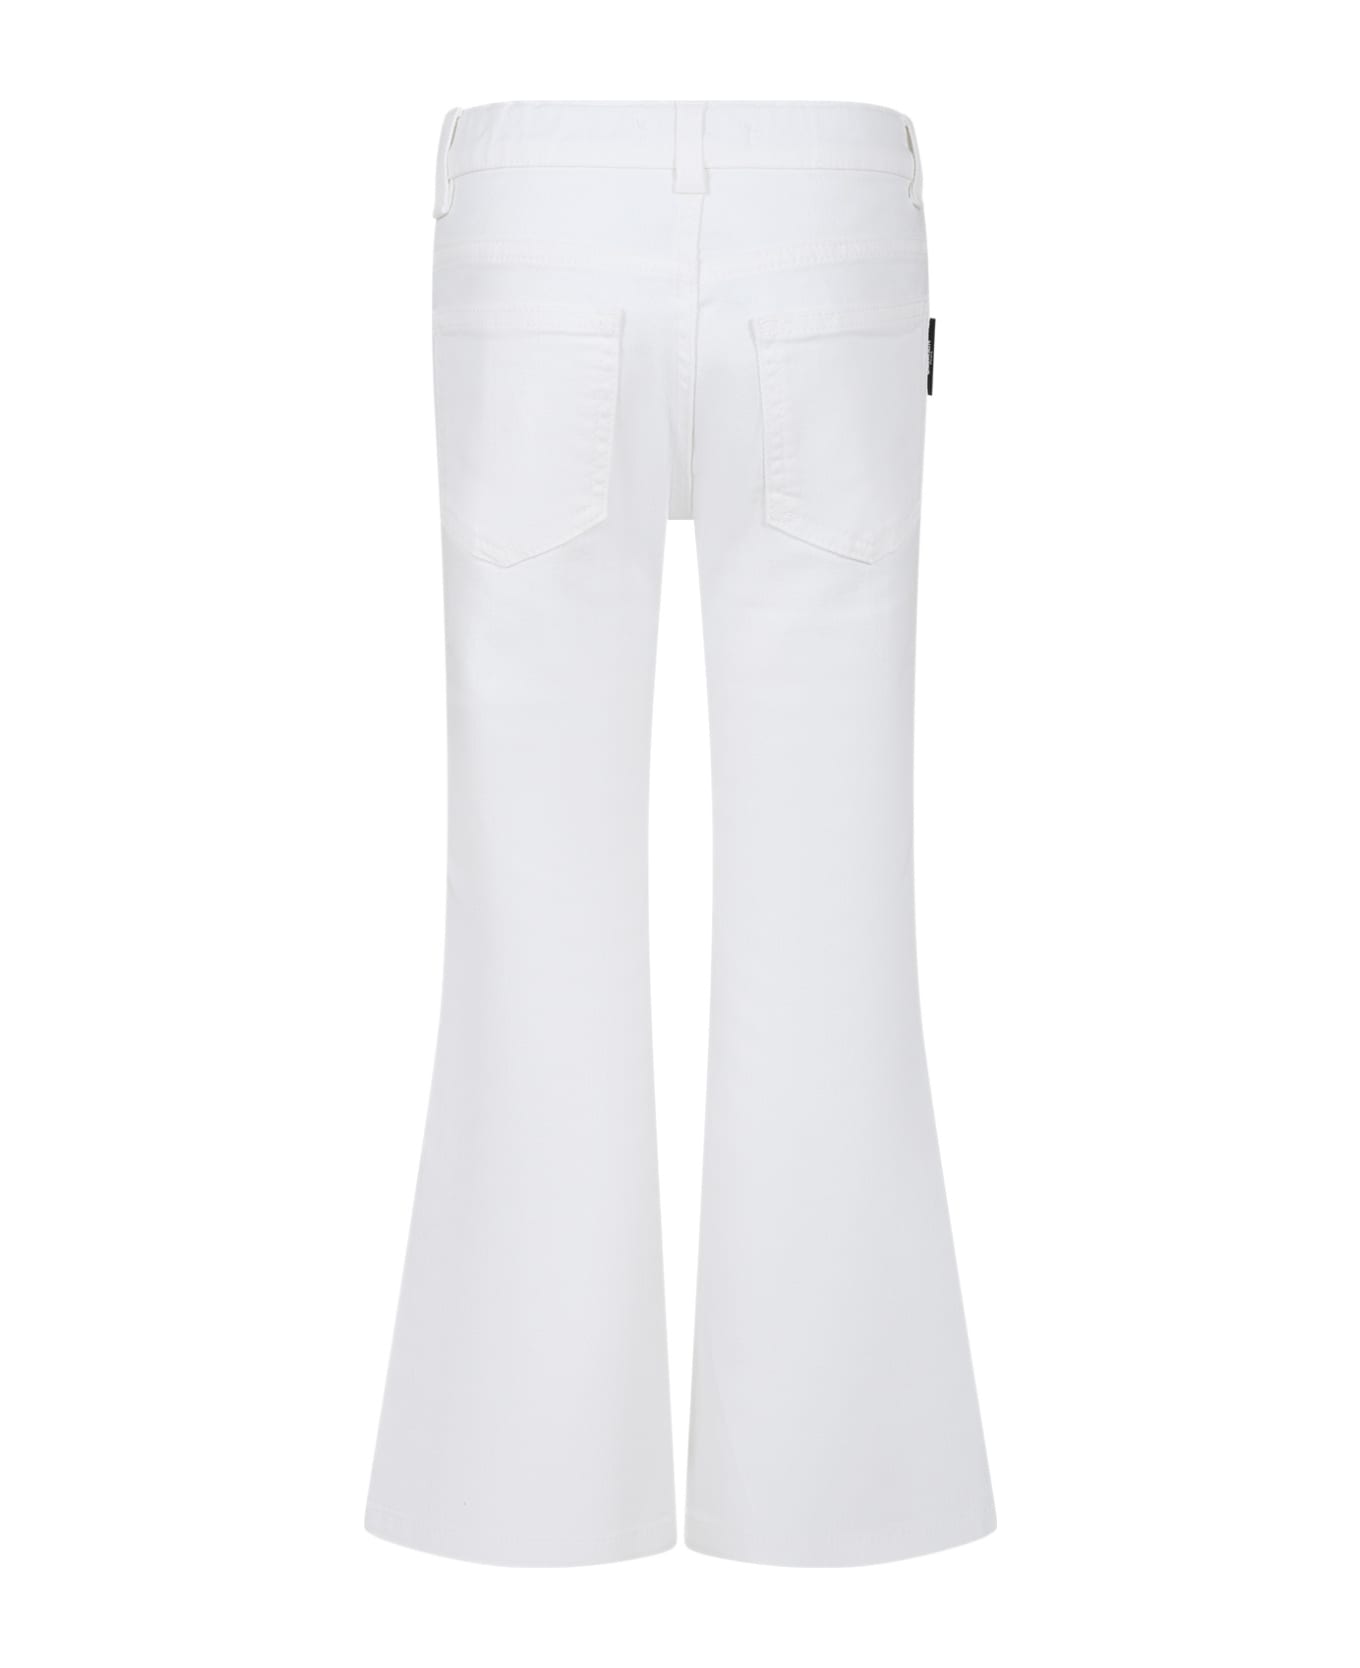 Balmain White Jeans For Girl With Gold Buttons - White ボトムス